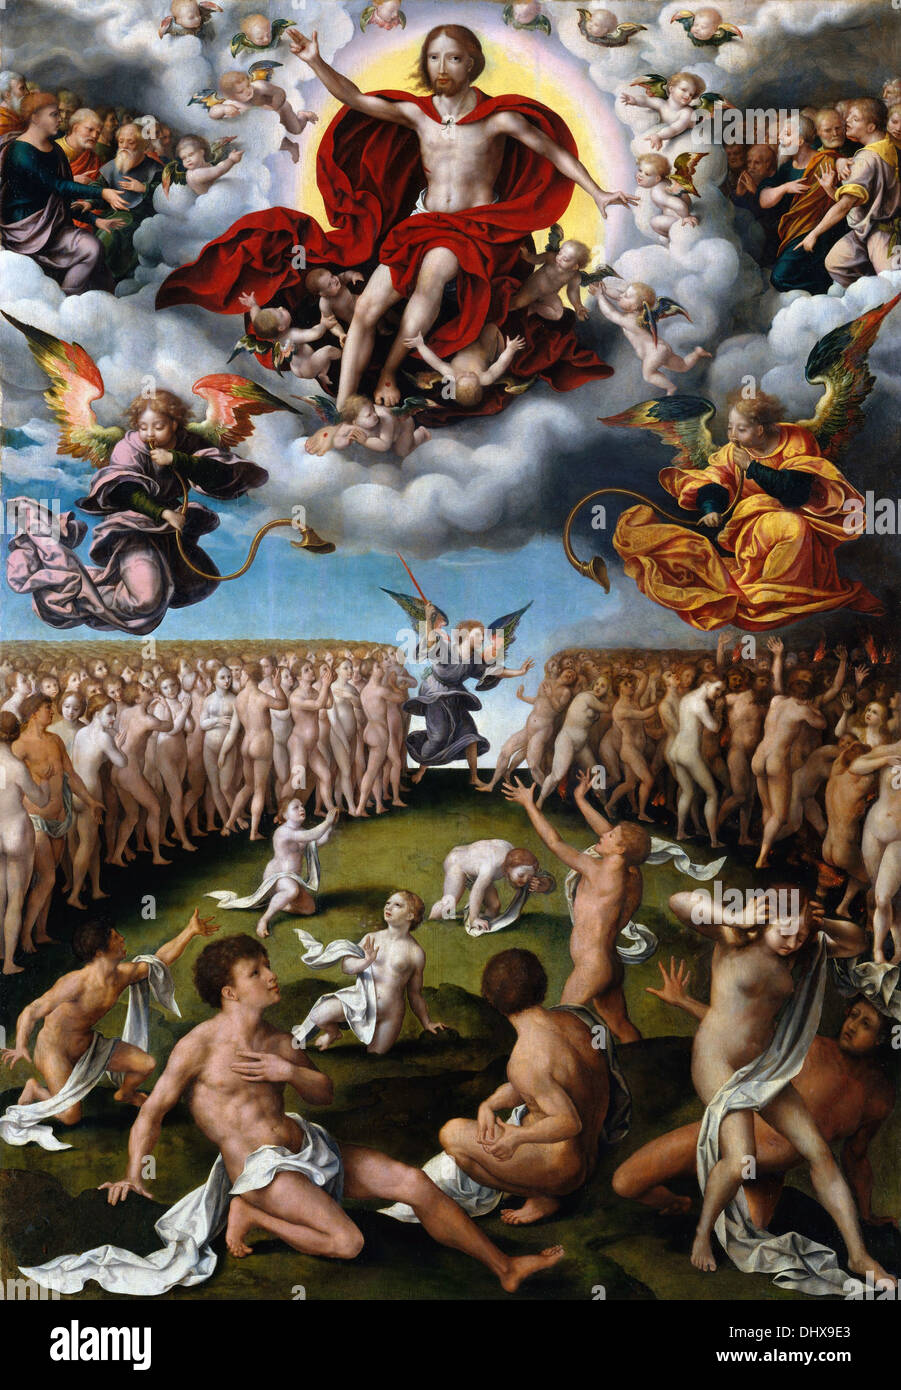 The Last Judgment - by Joos van Cleve, 1525 Stock Photo